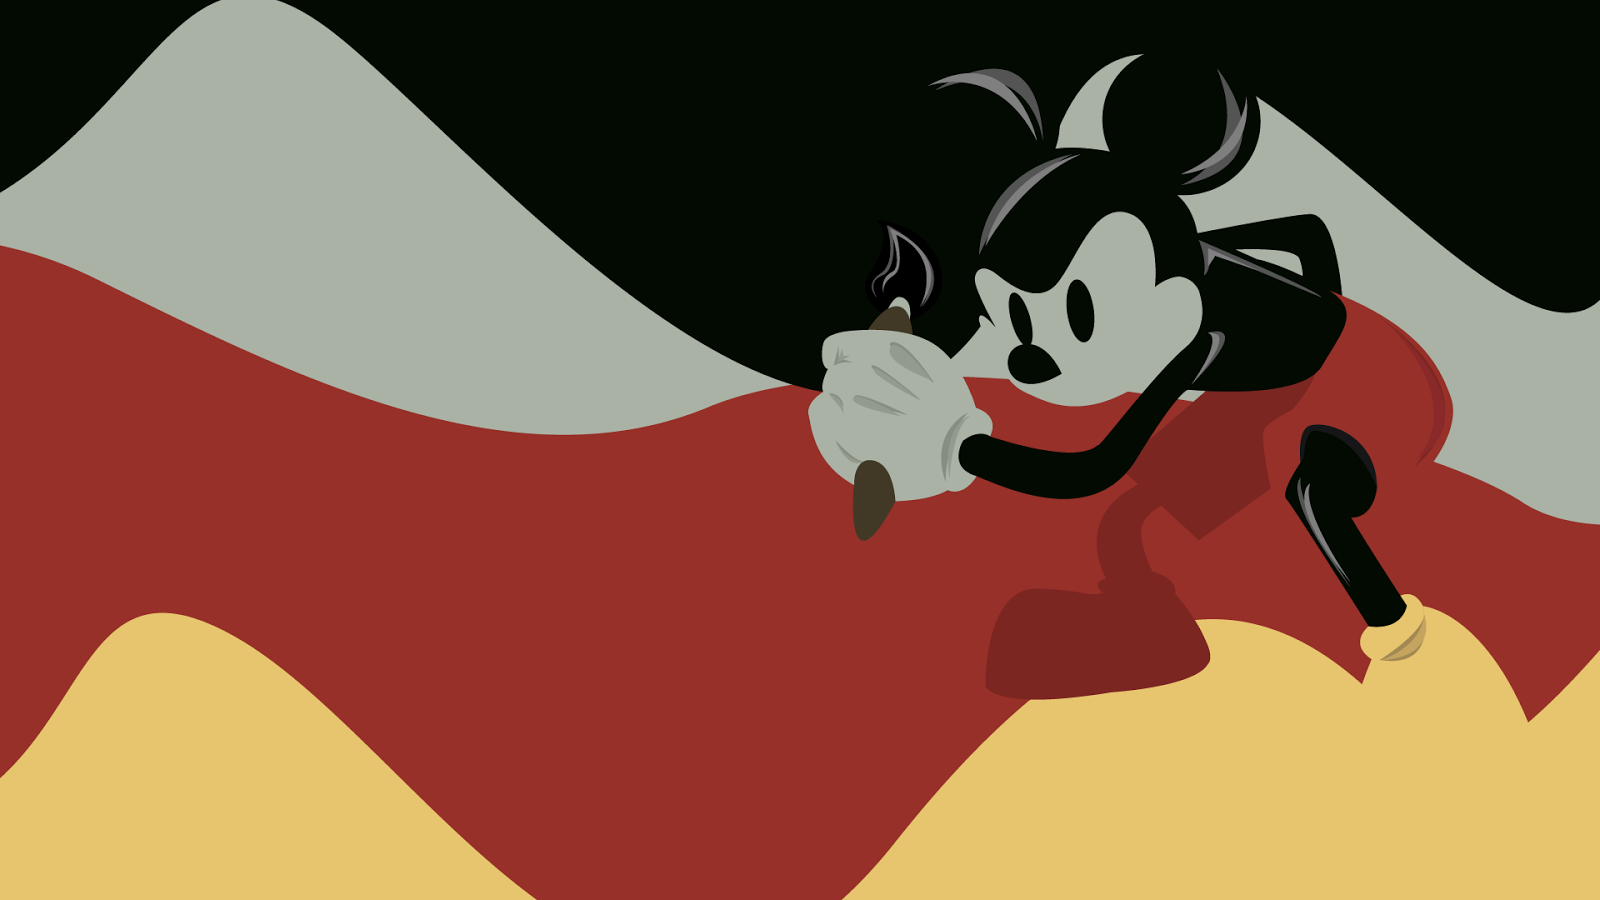 Black Mickey Mouse Wallpaper images